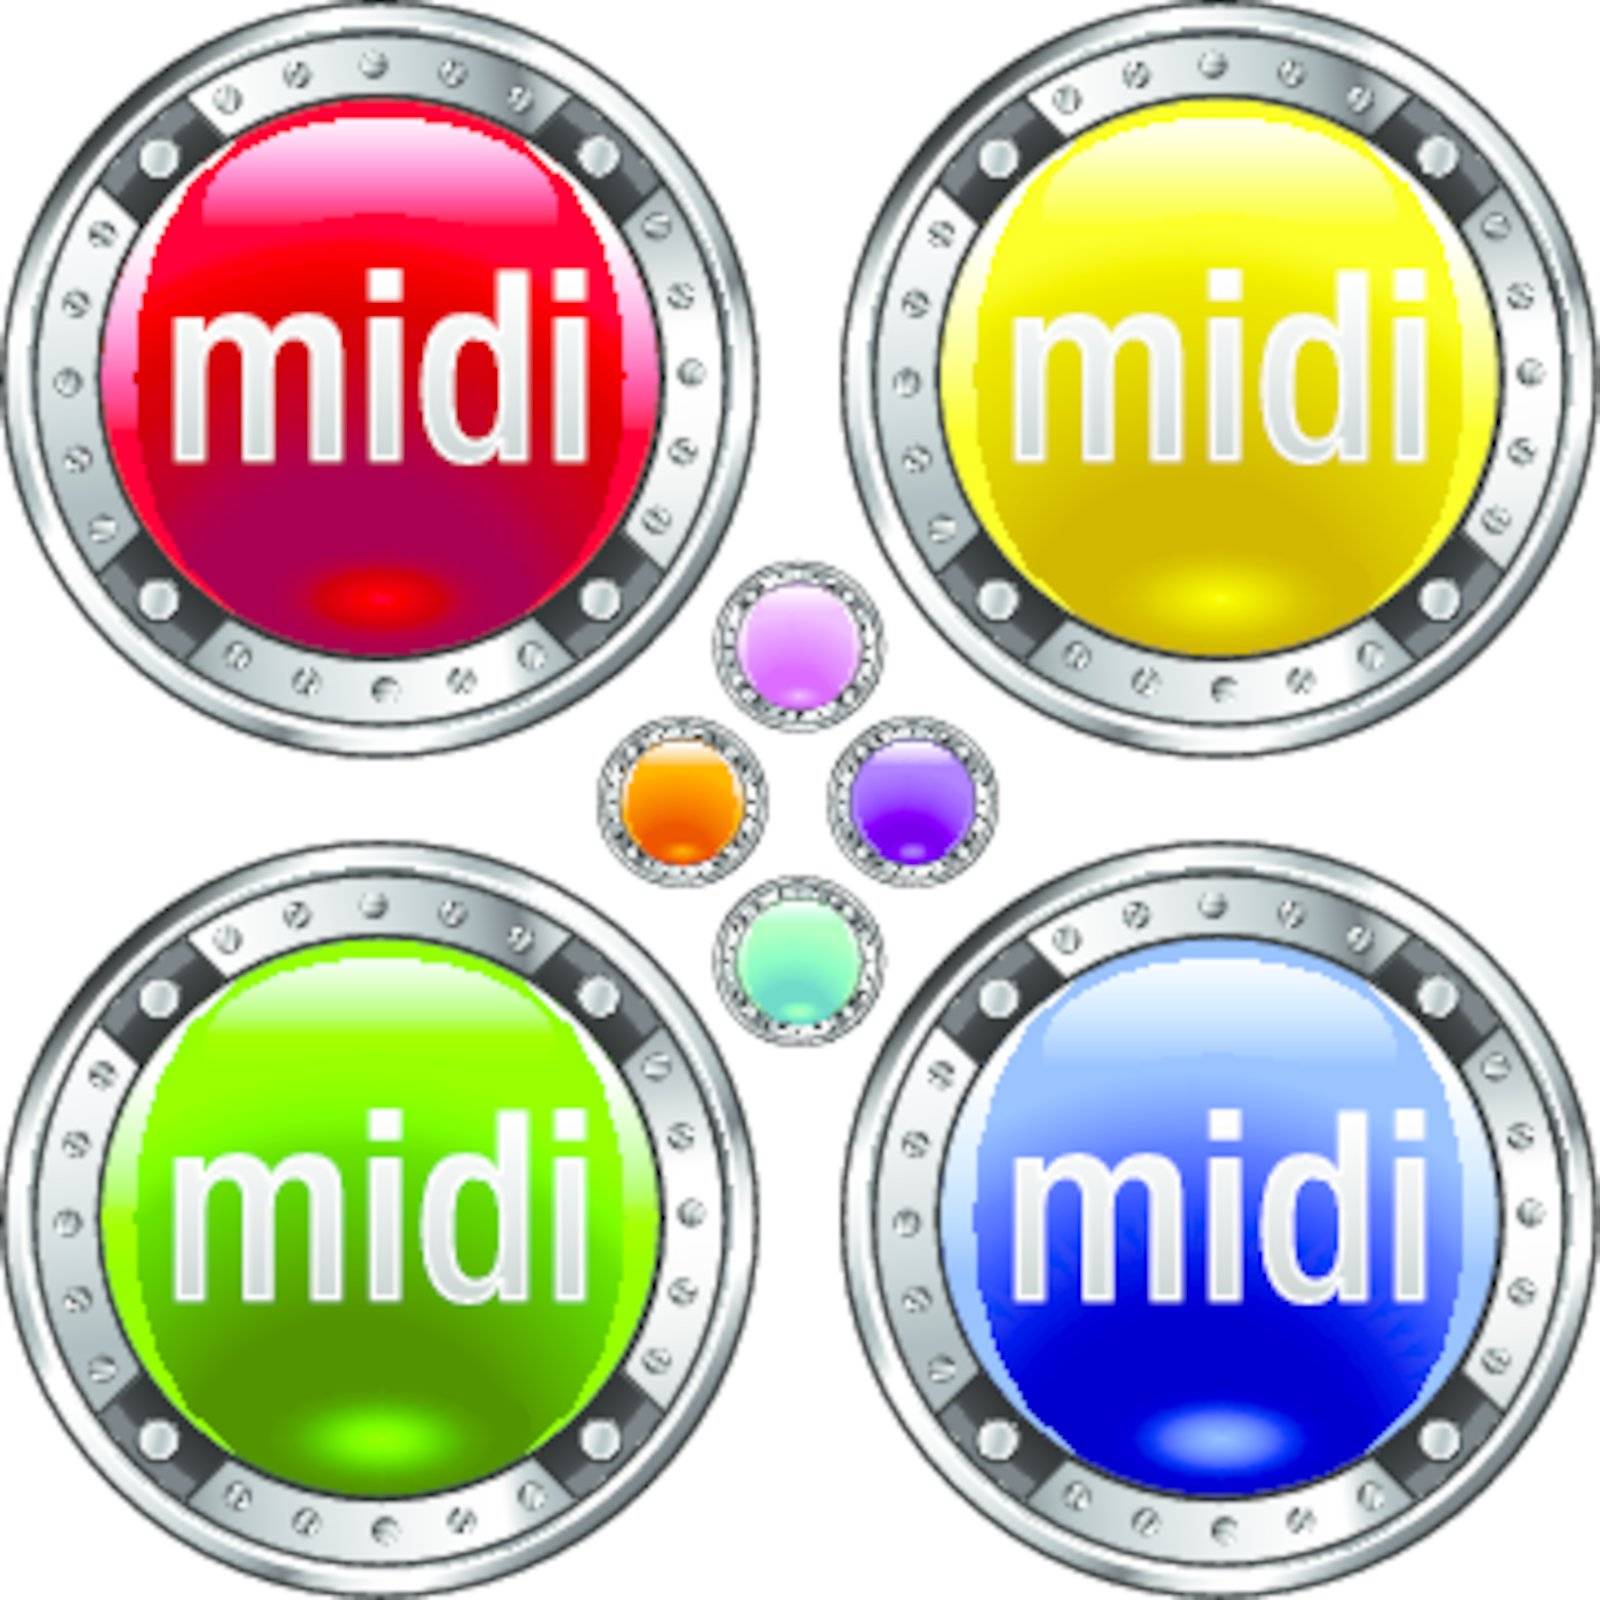 MIDI file type colorful button by lhfgraphics